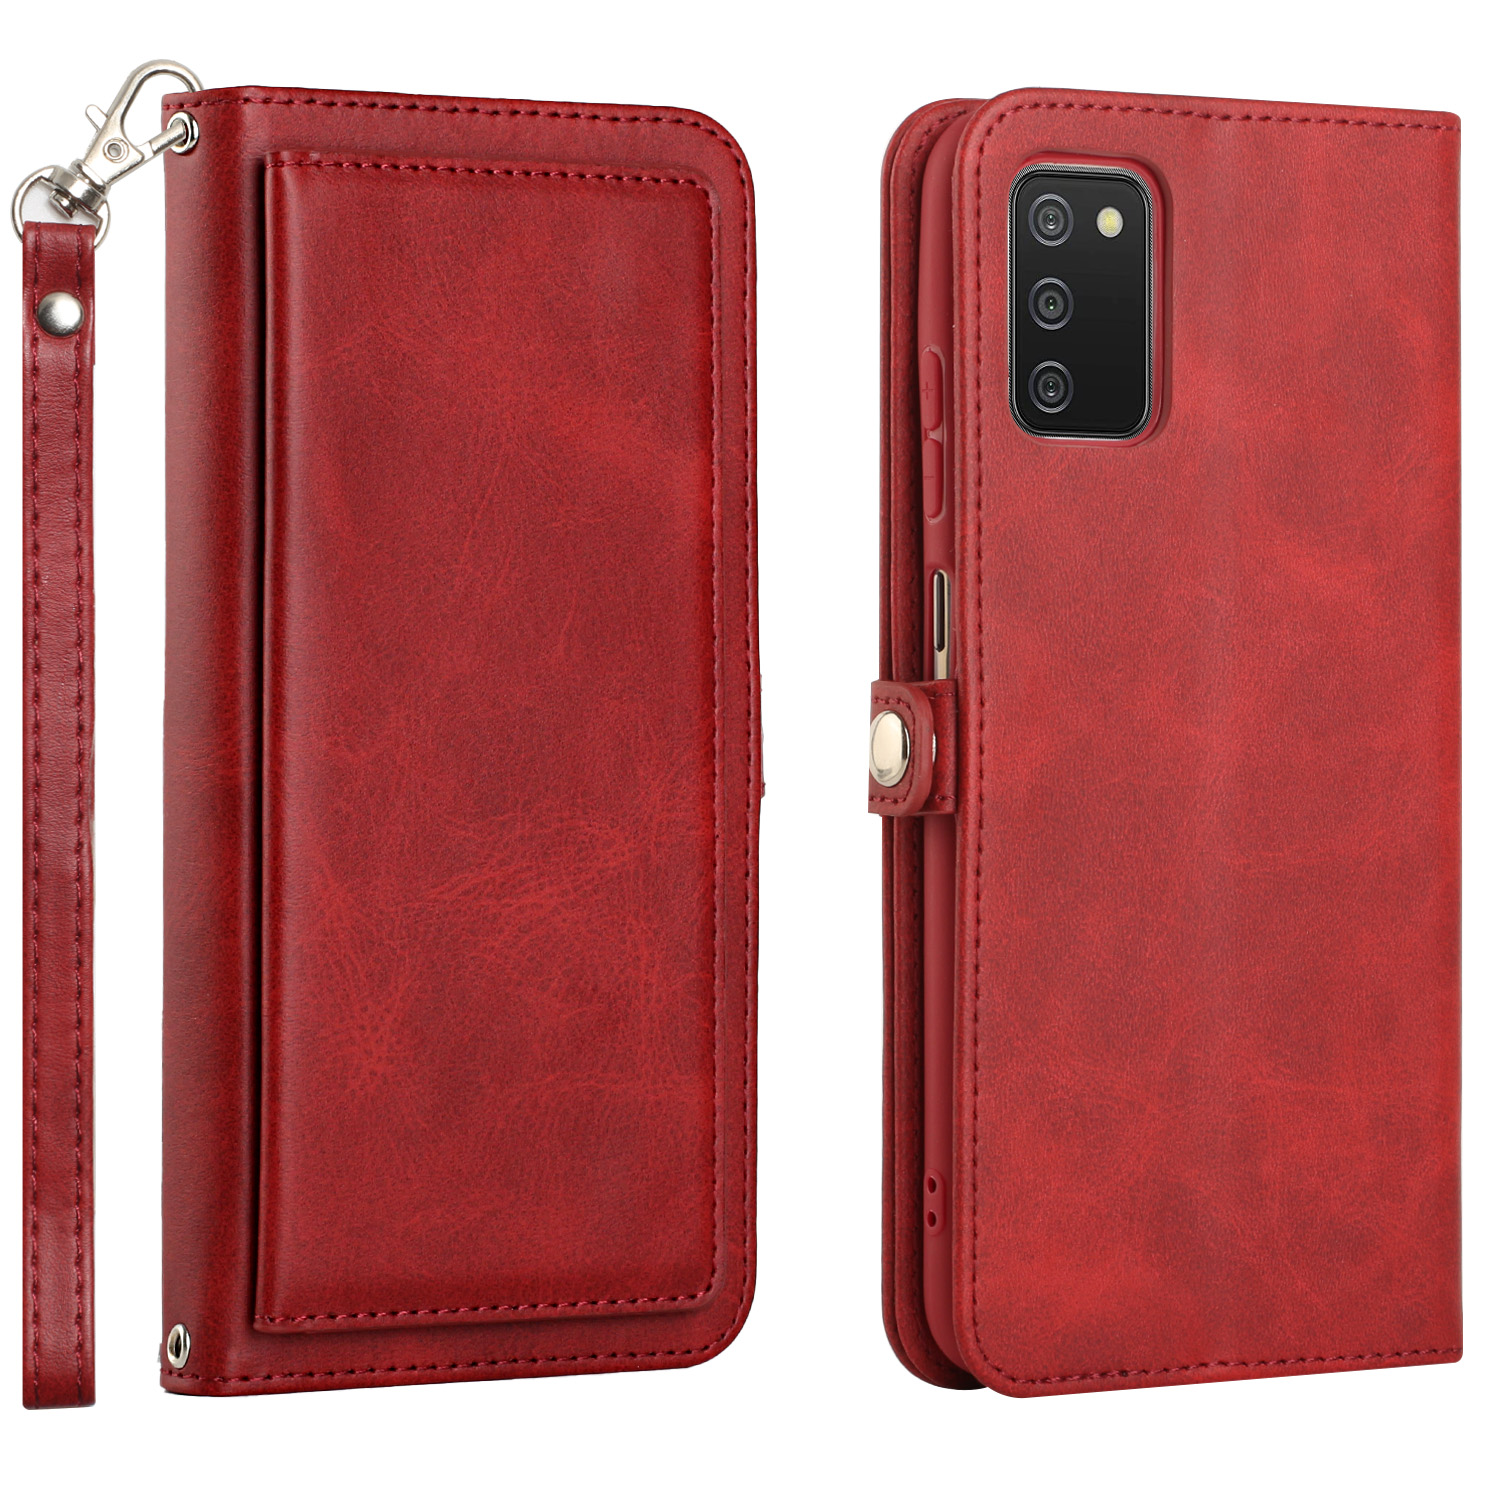 Premium PU Leather Folio WALLET Front Cover Case for Galaxy A02s (Red)